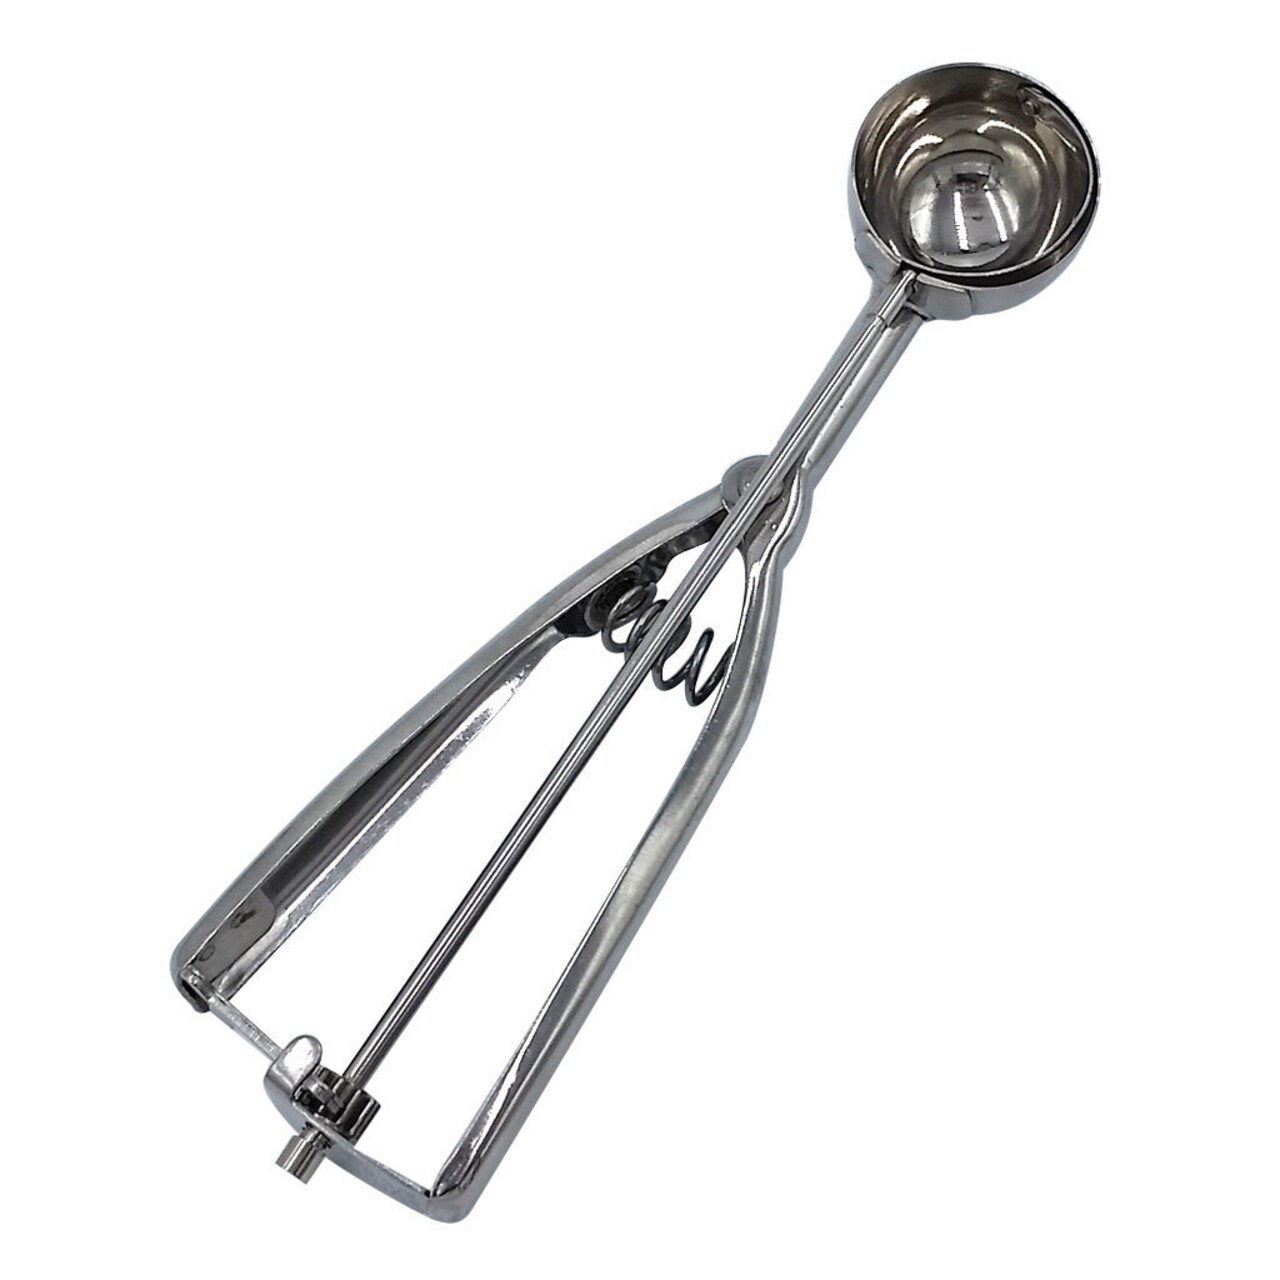 Round Cookie Dough Scoop, Stainless Steel Squeeze Disher